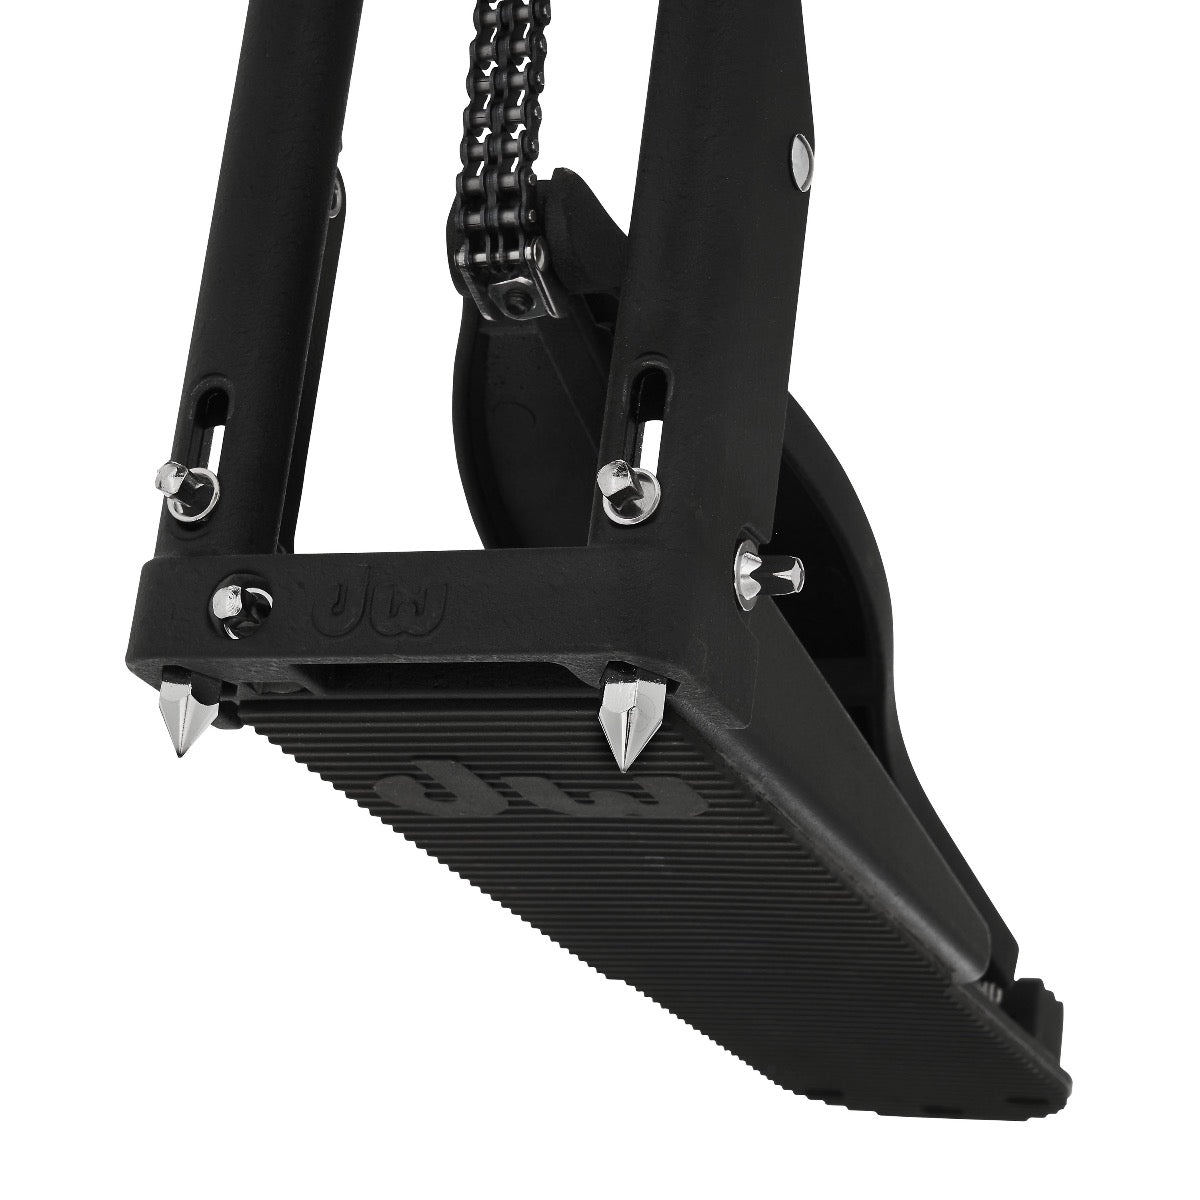 Detail image of Drum Workshop DWCP3500A 3-Leg Hi-Hat Stand showing footboard bottom and rear